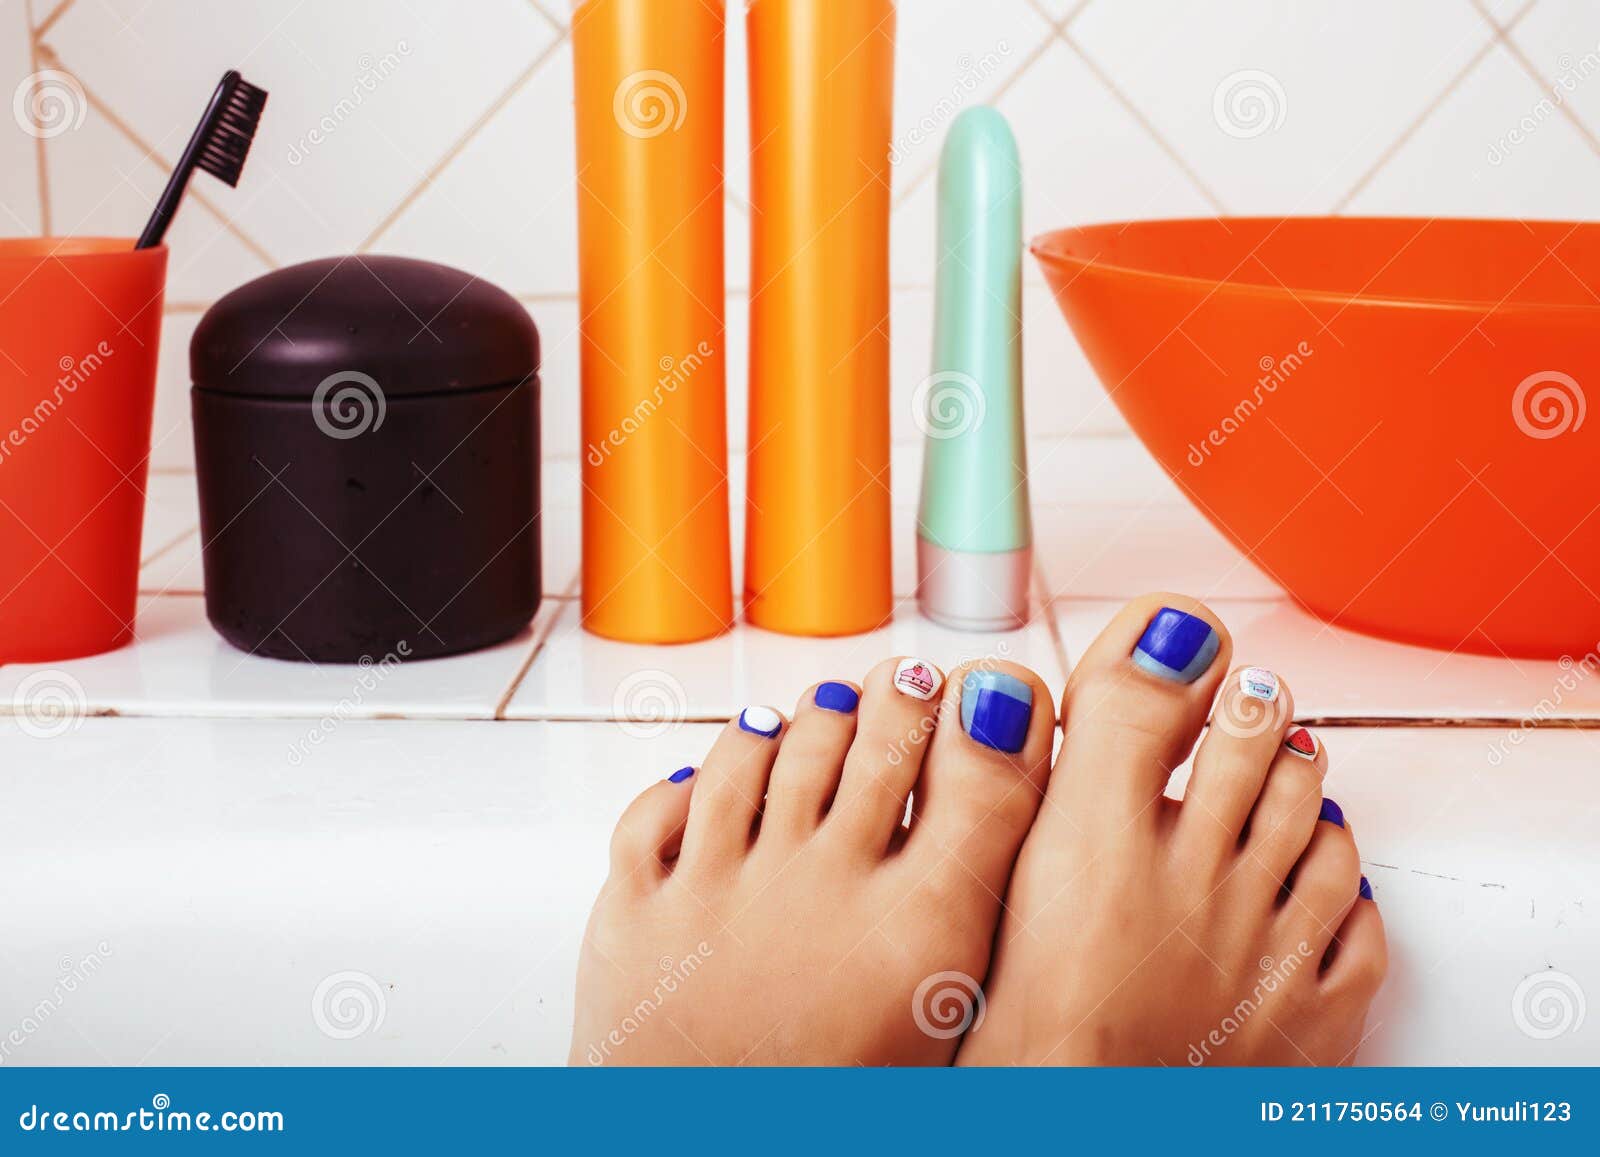 Woman Legs in Bathroom with Lot of Stylish Stuff for Care, Pedicure ...